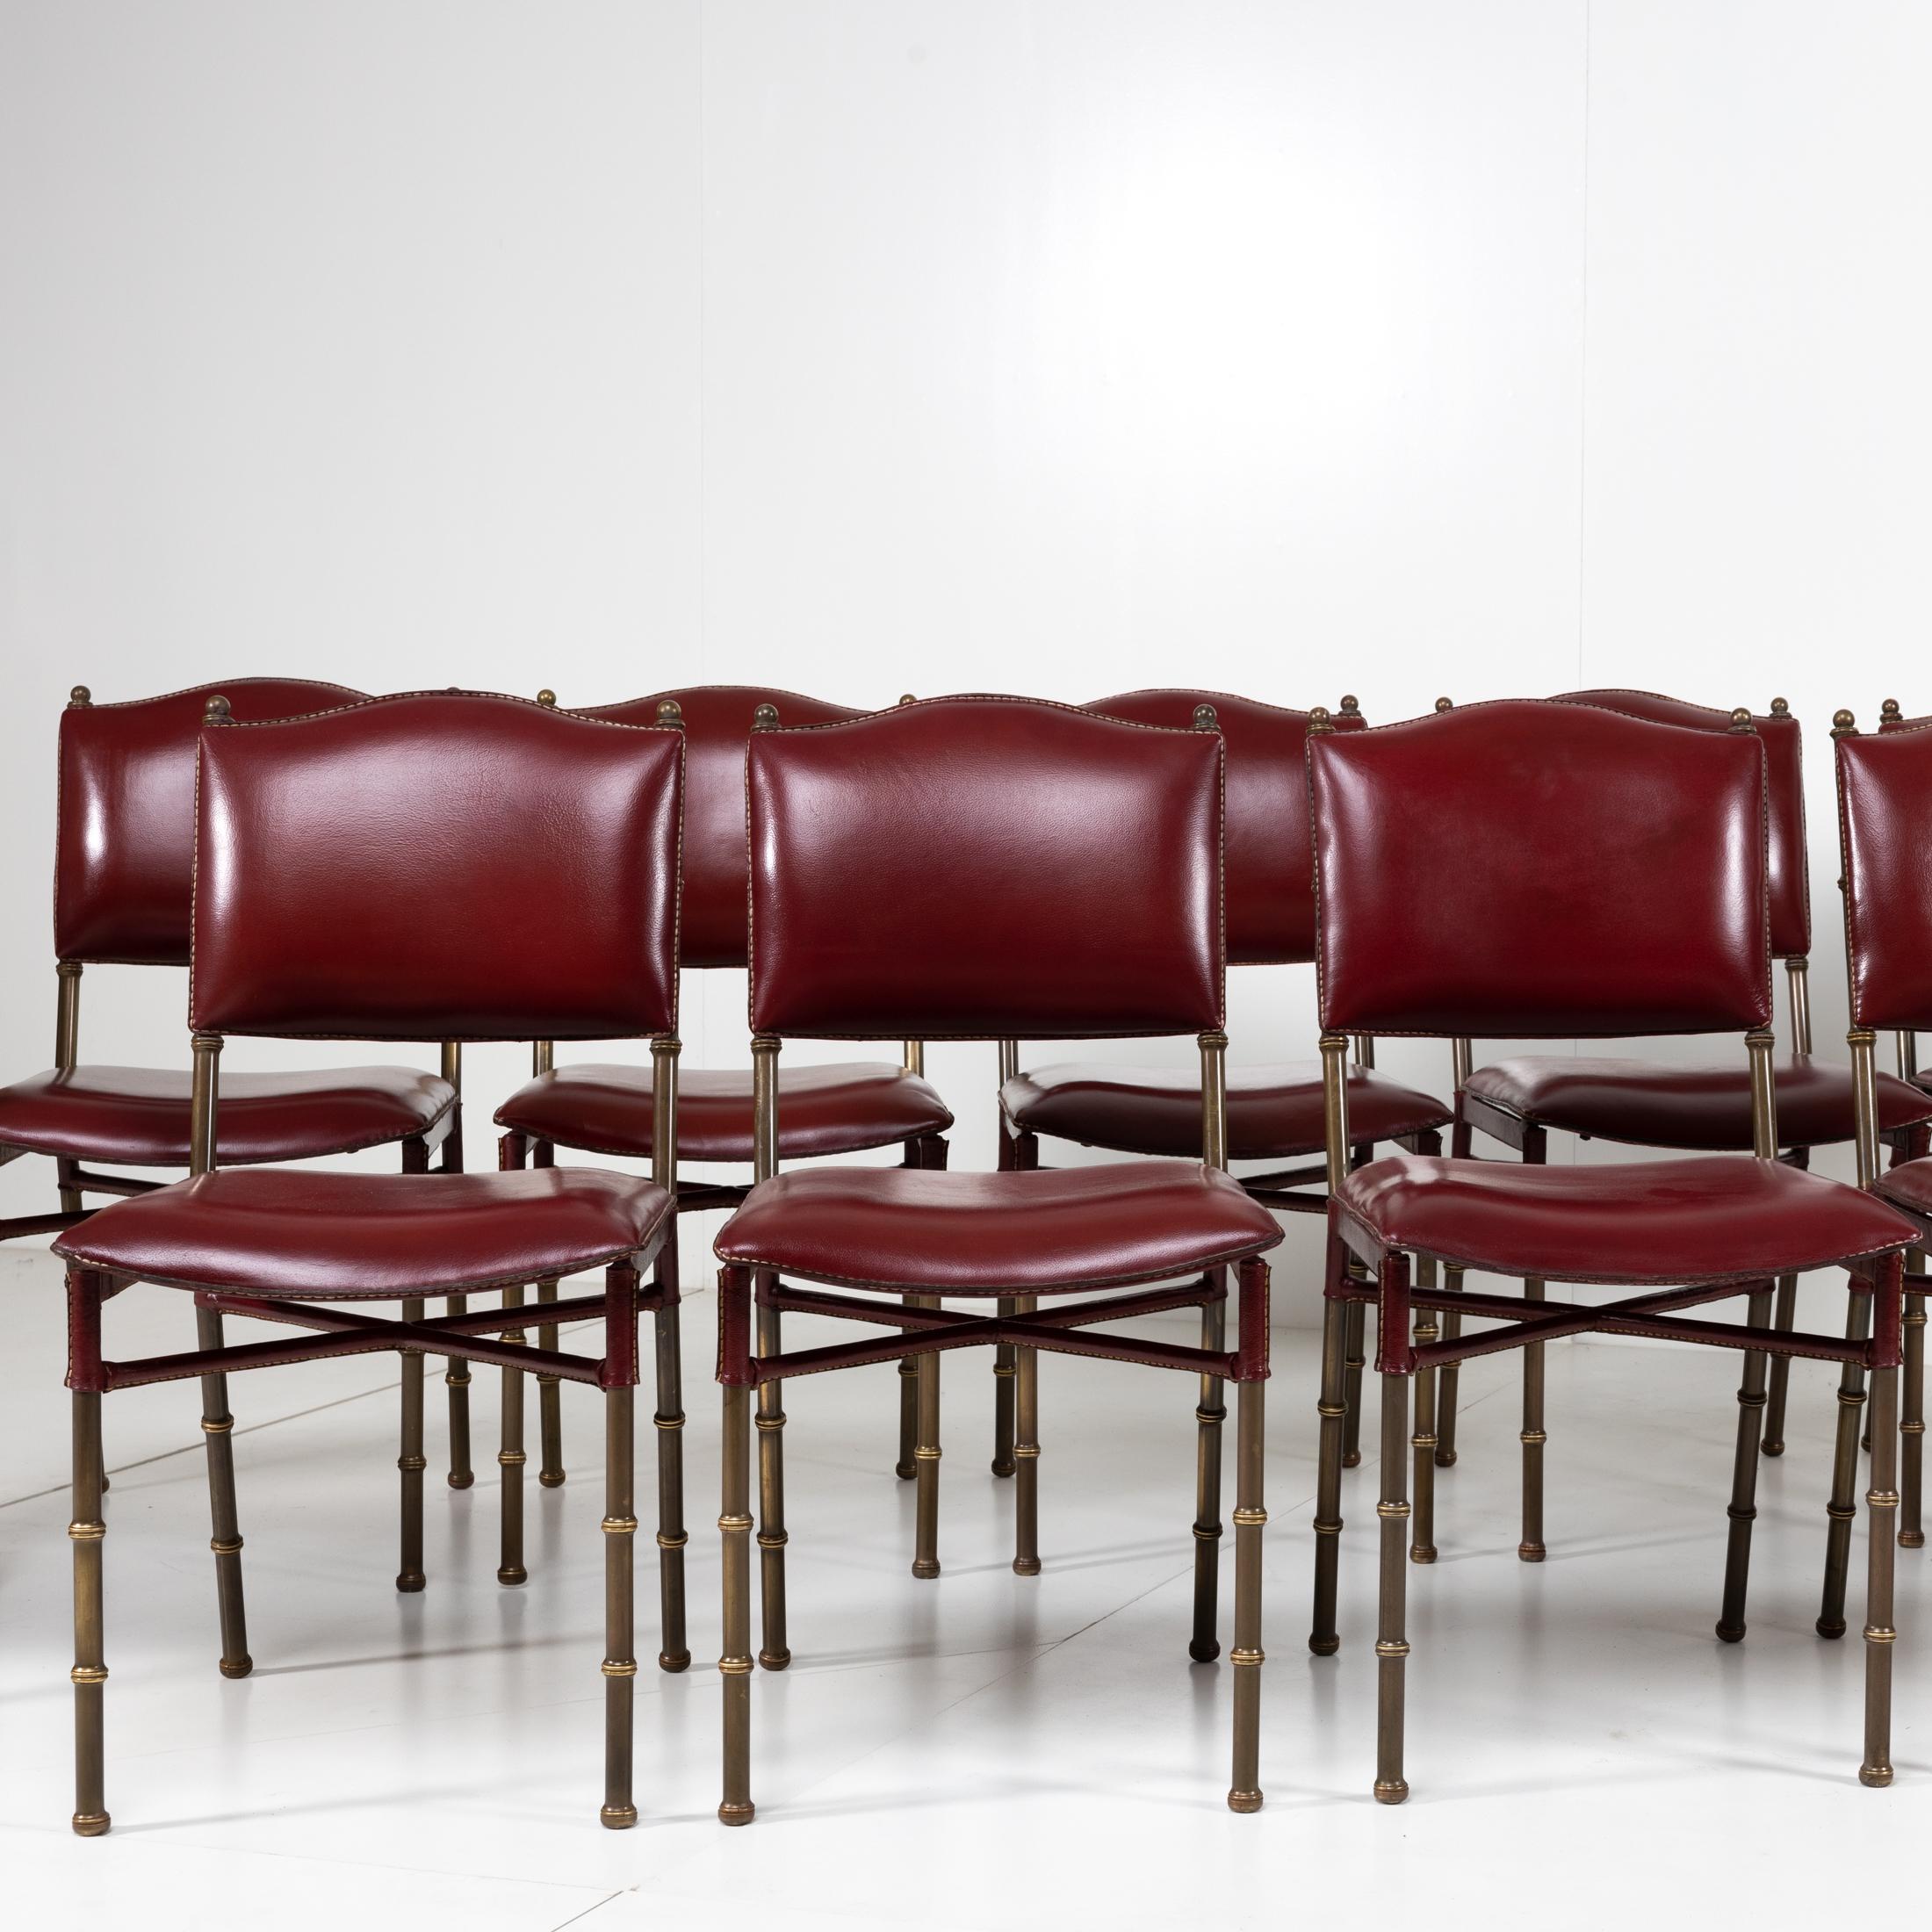 Brass Set of 12 Saddle Stitched Red Leather Chairs by Jacques Adnet, France For Sale